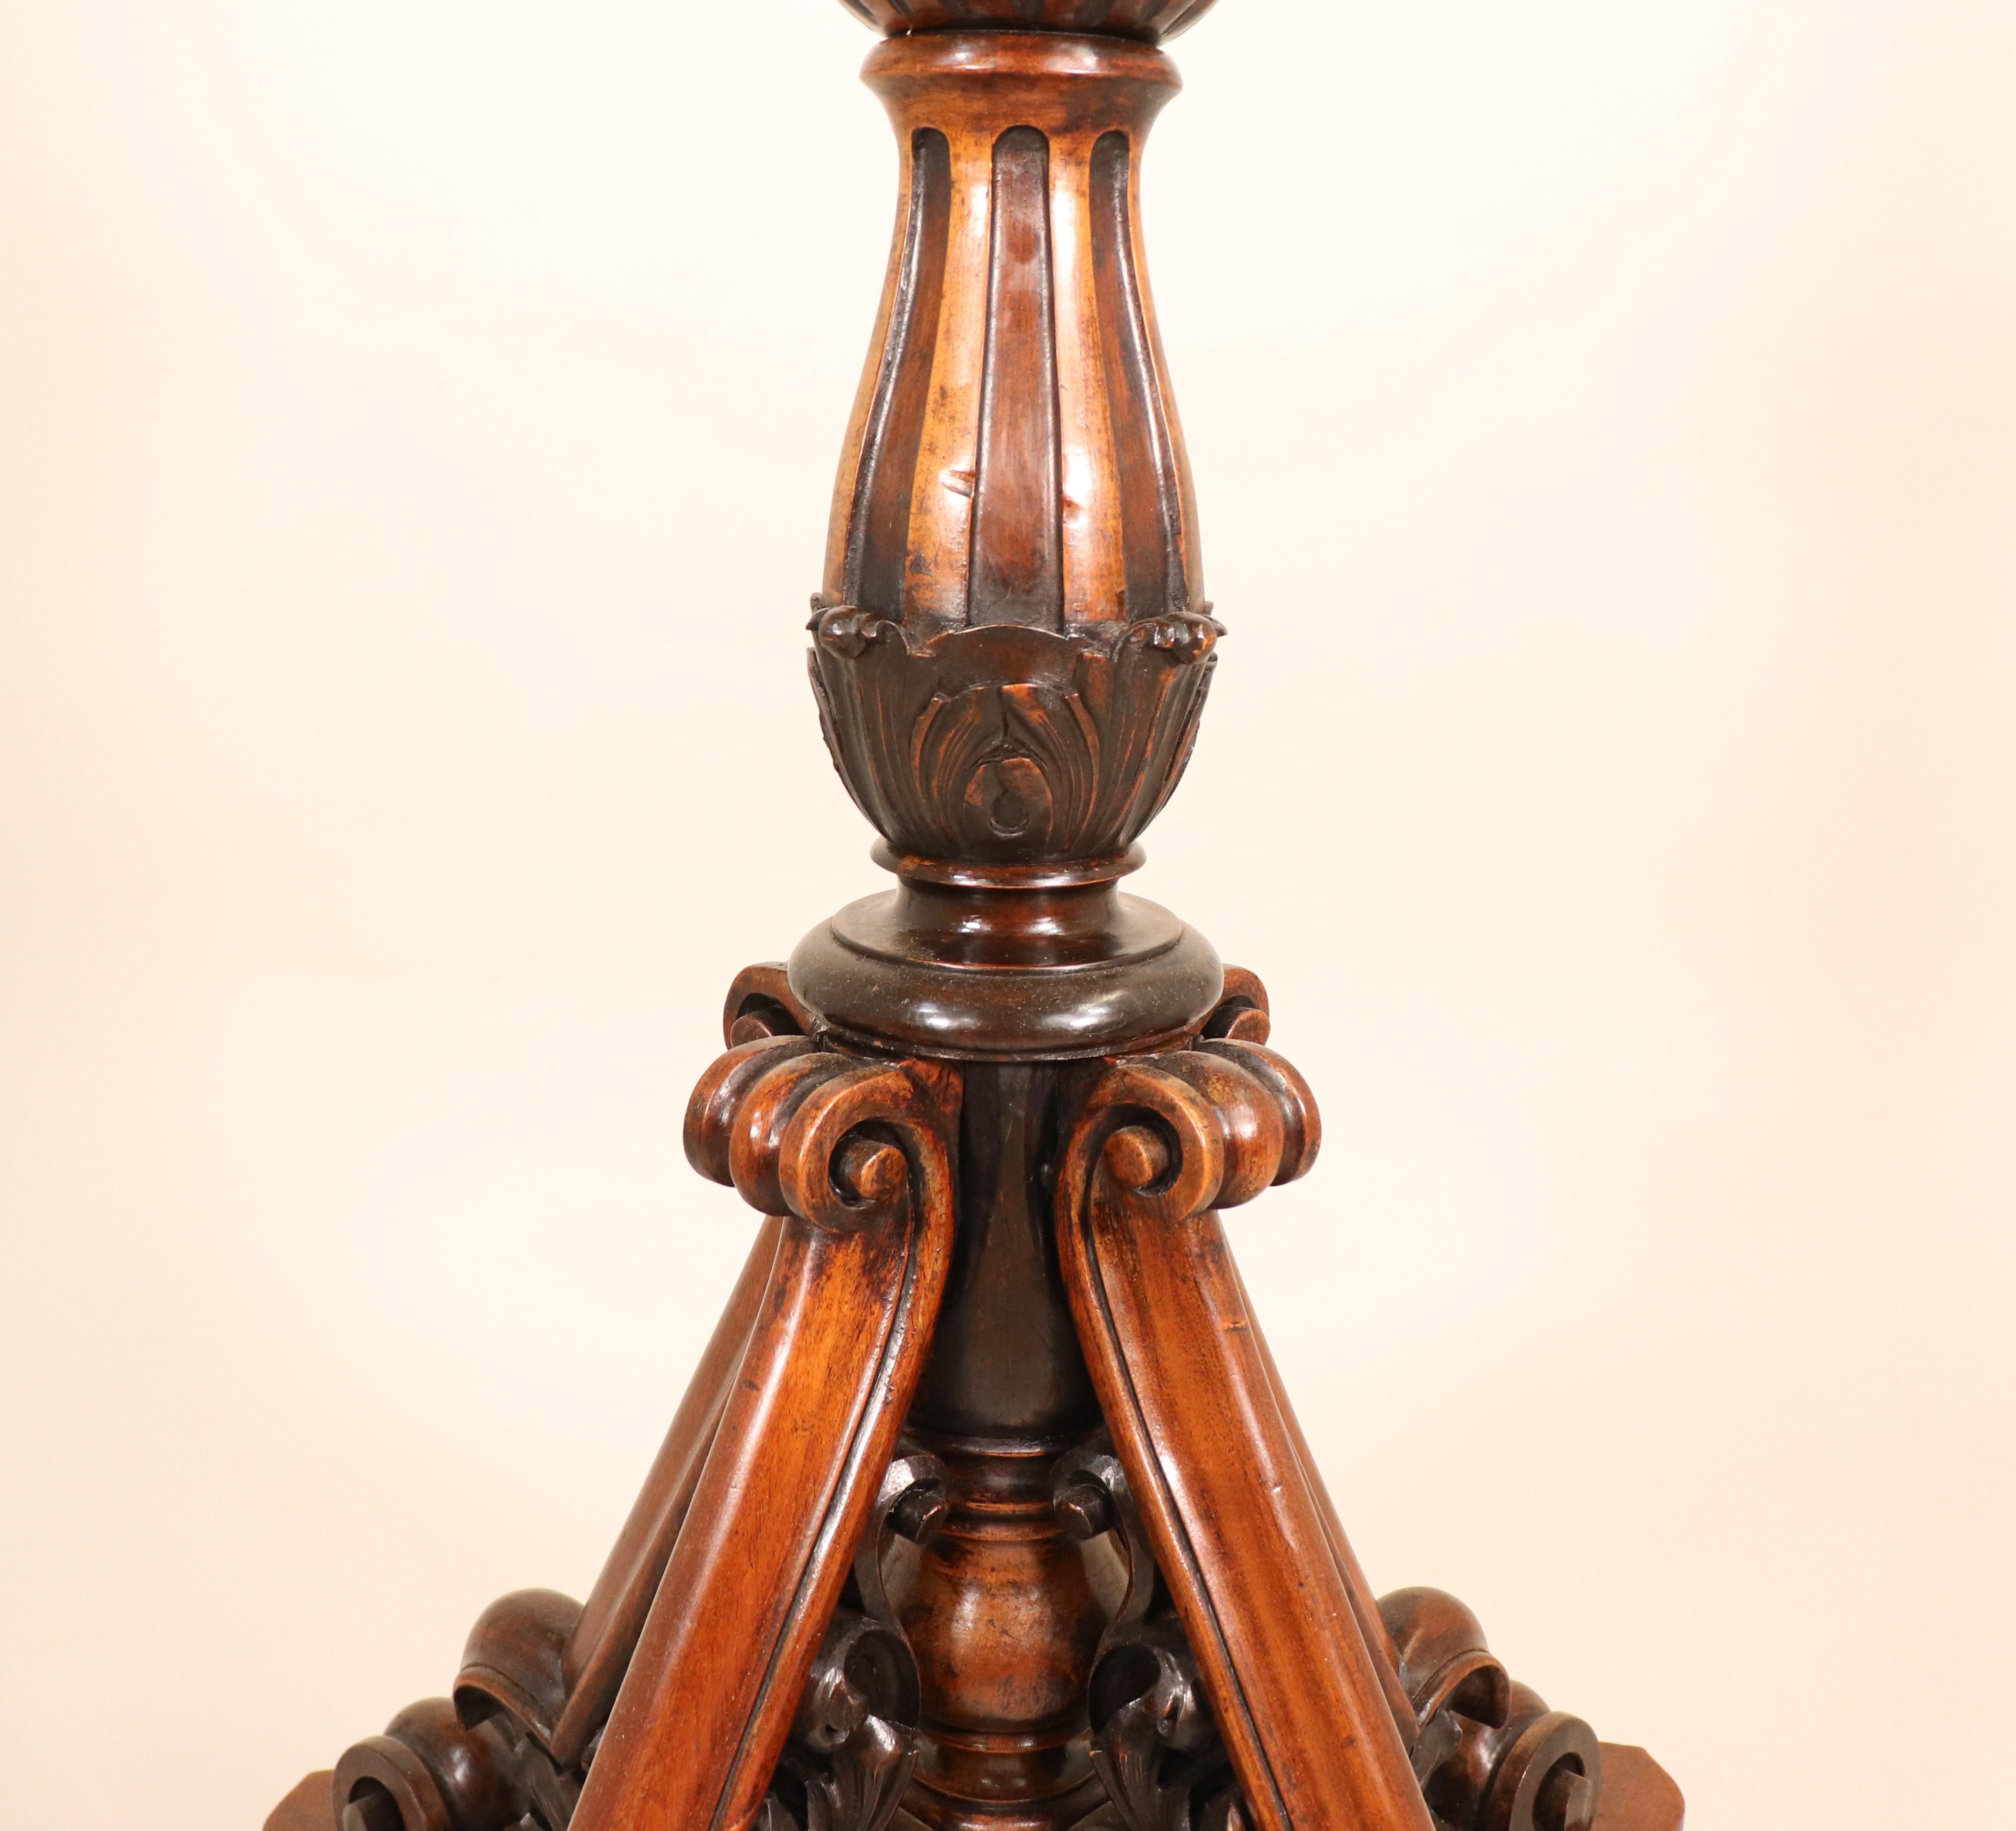 Stained Glass Late 19th Century French Renissance Revival Hand Carved Walnut Floor Lamp